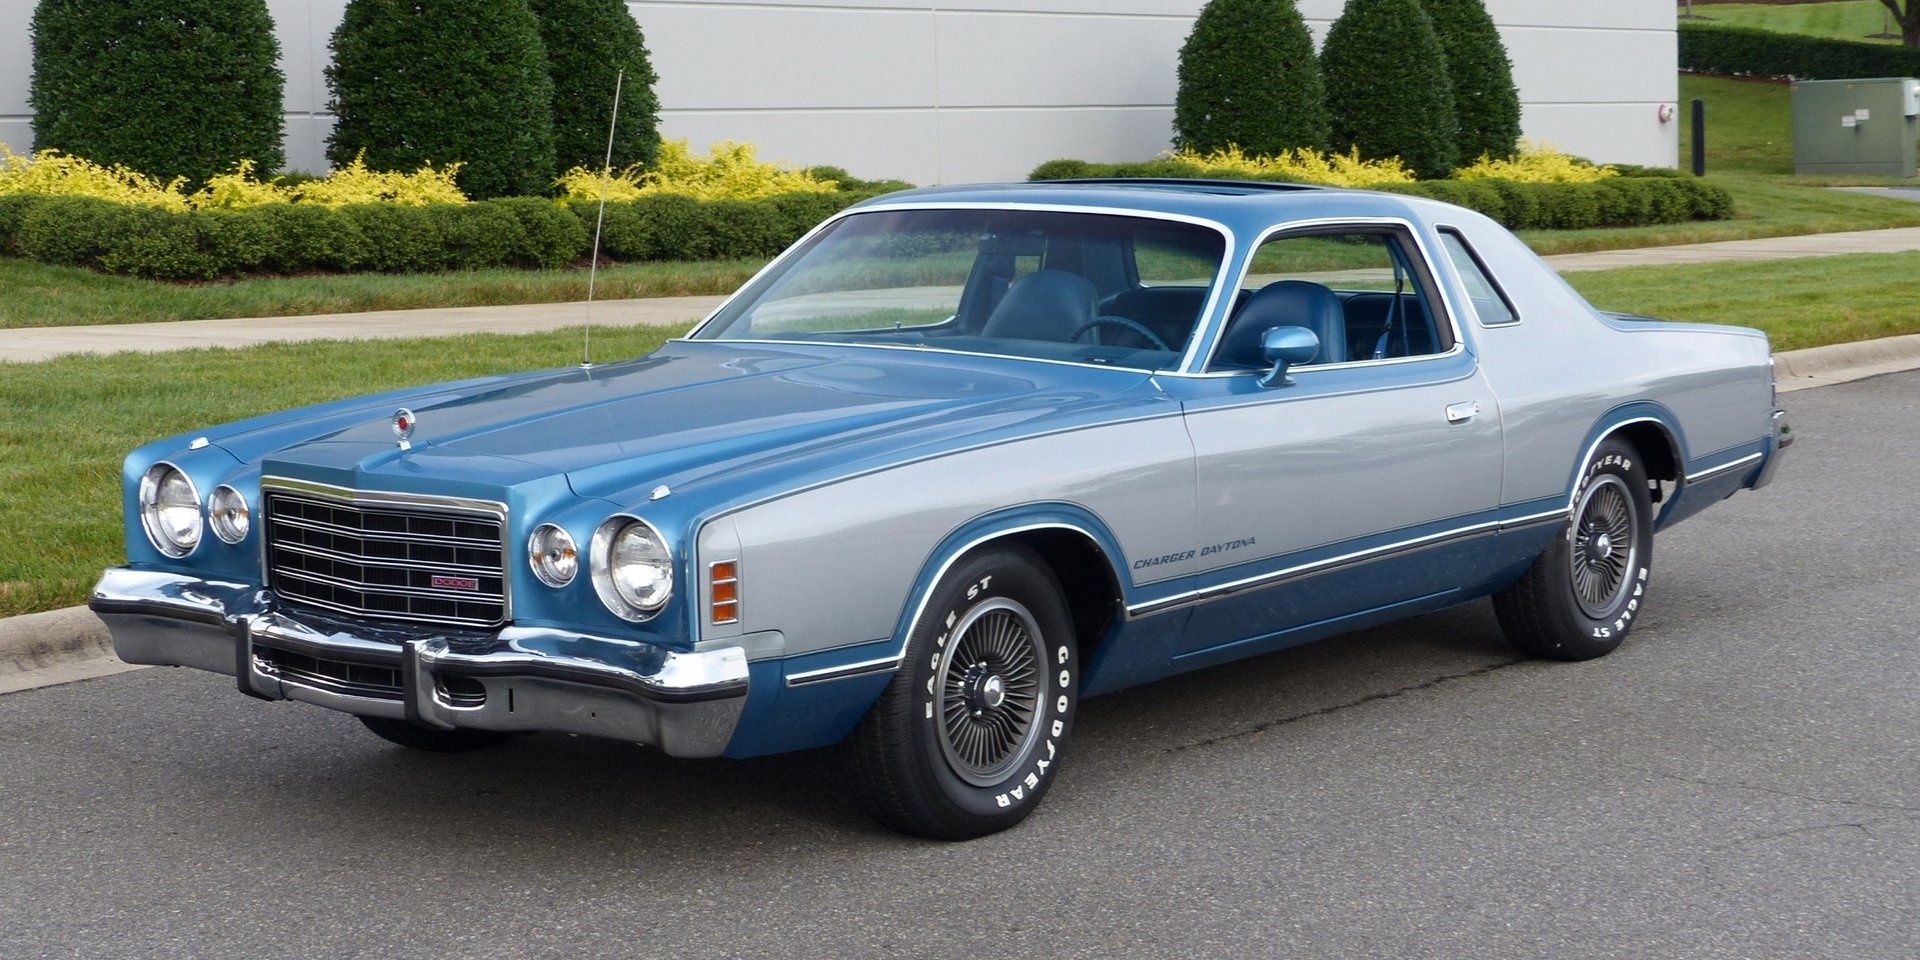 These American Cars Were Turning Heads In The 70s...Now They're Worth Nothing